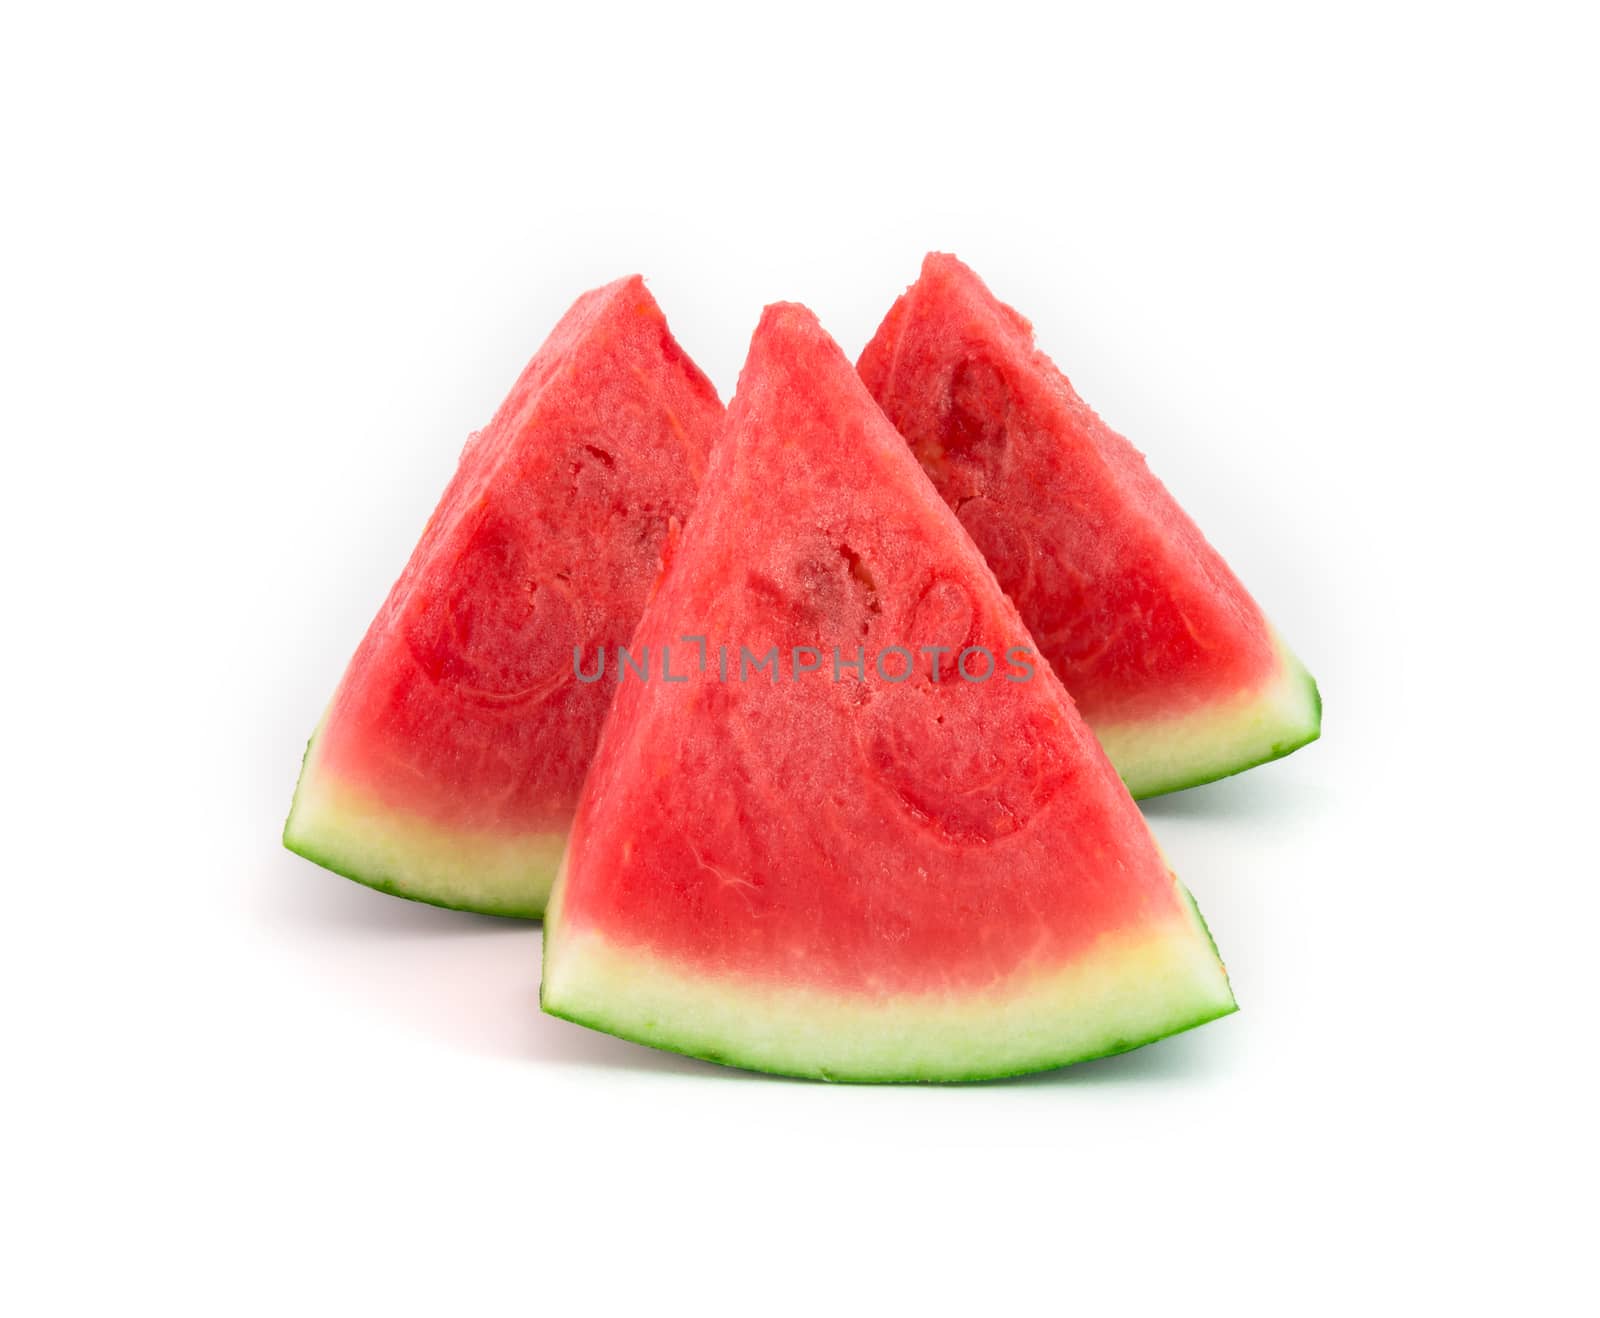 fresh seedless watermelon isolated on white